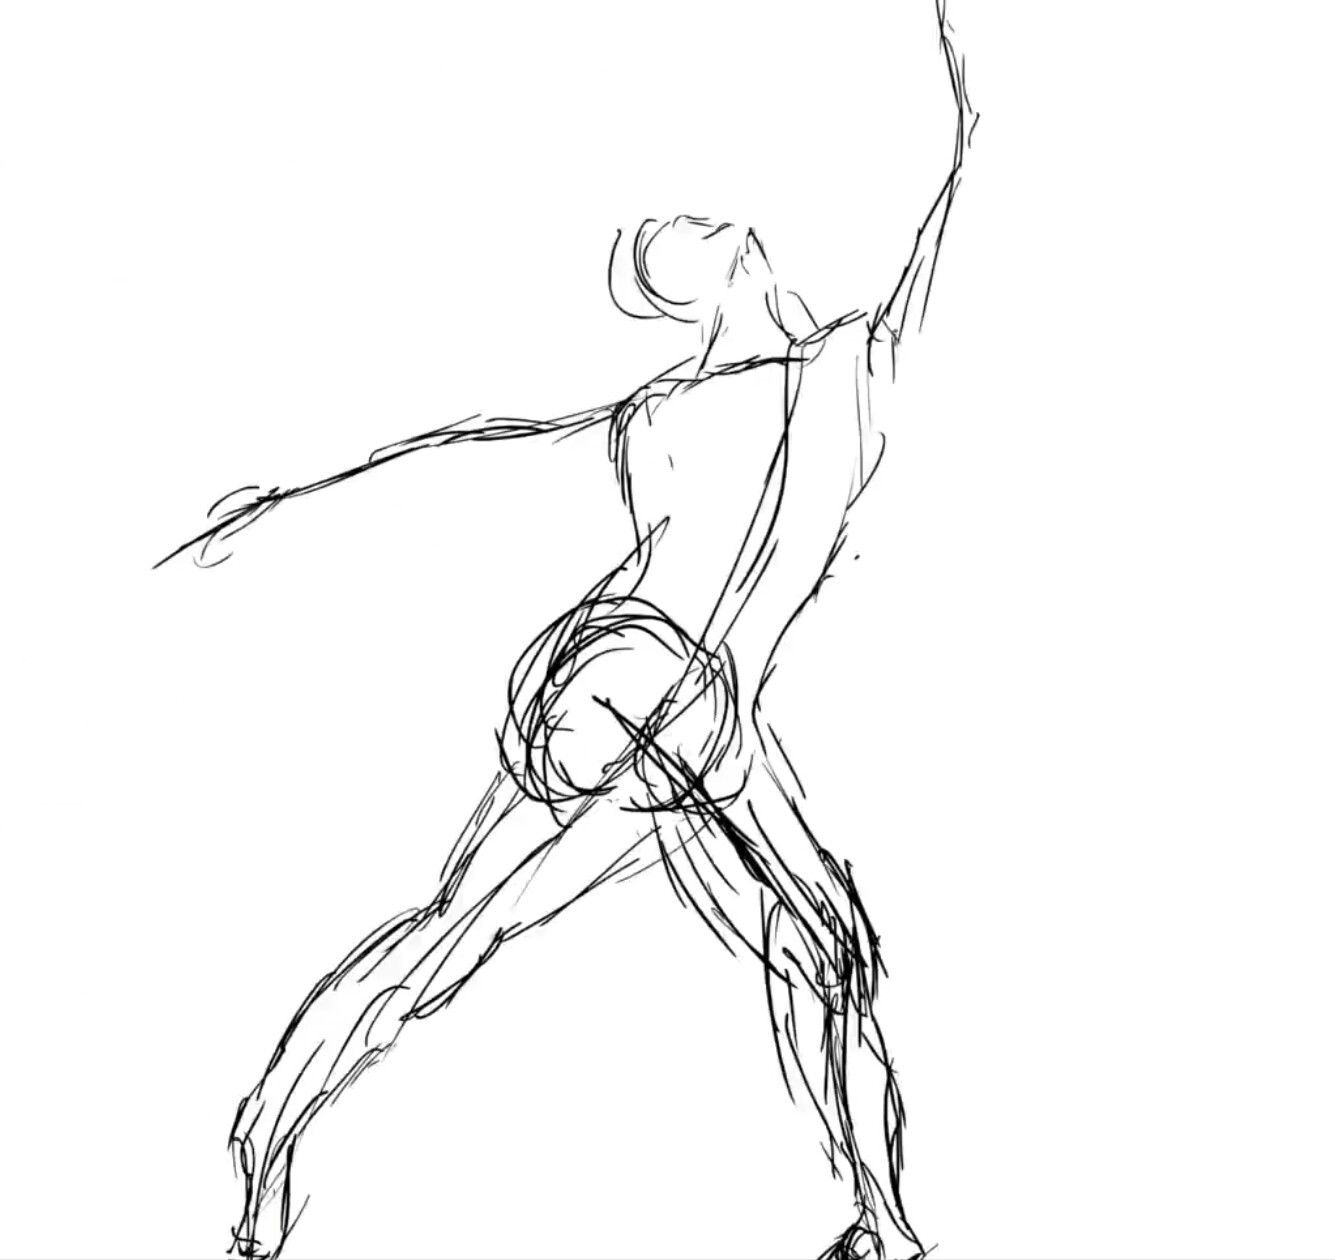 ArtStation - Bodies in Motion - 2D Animation Practice